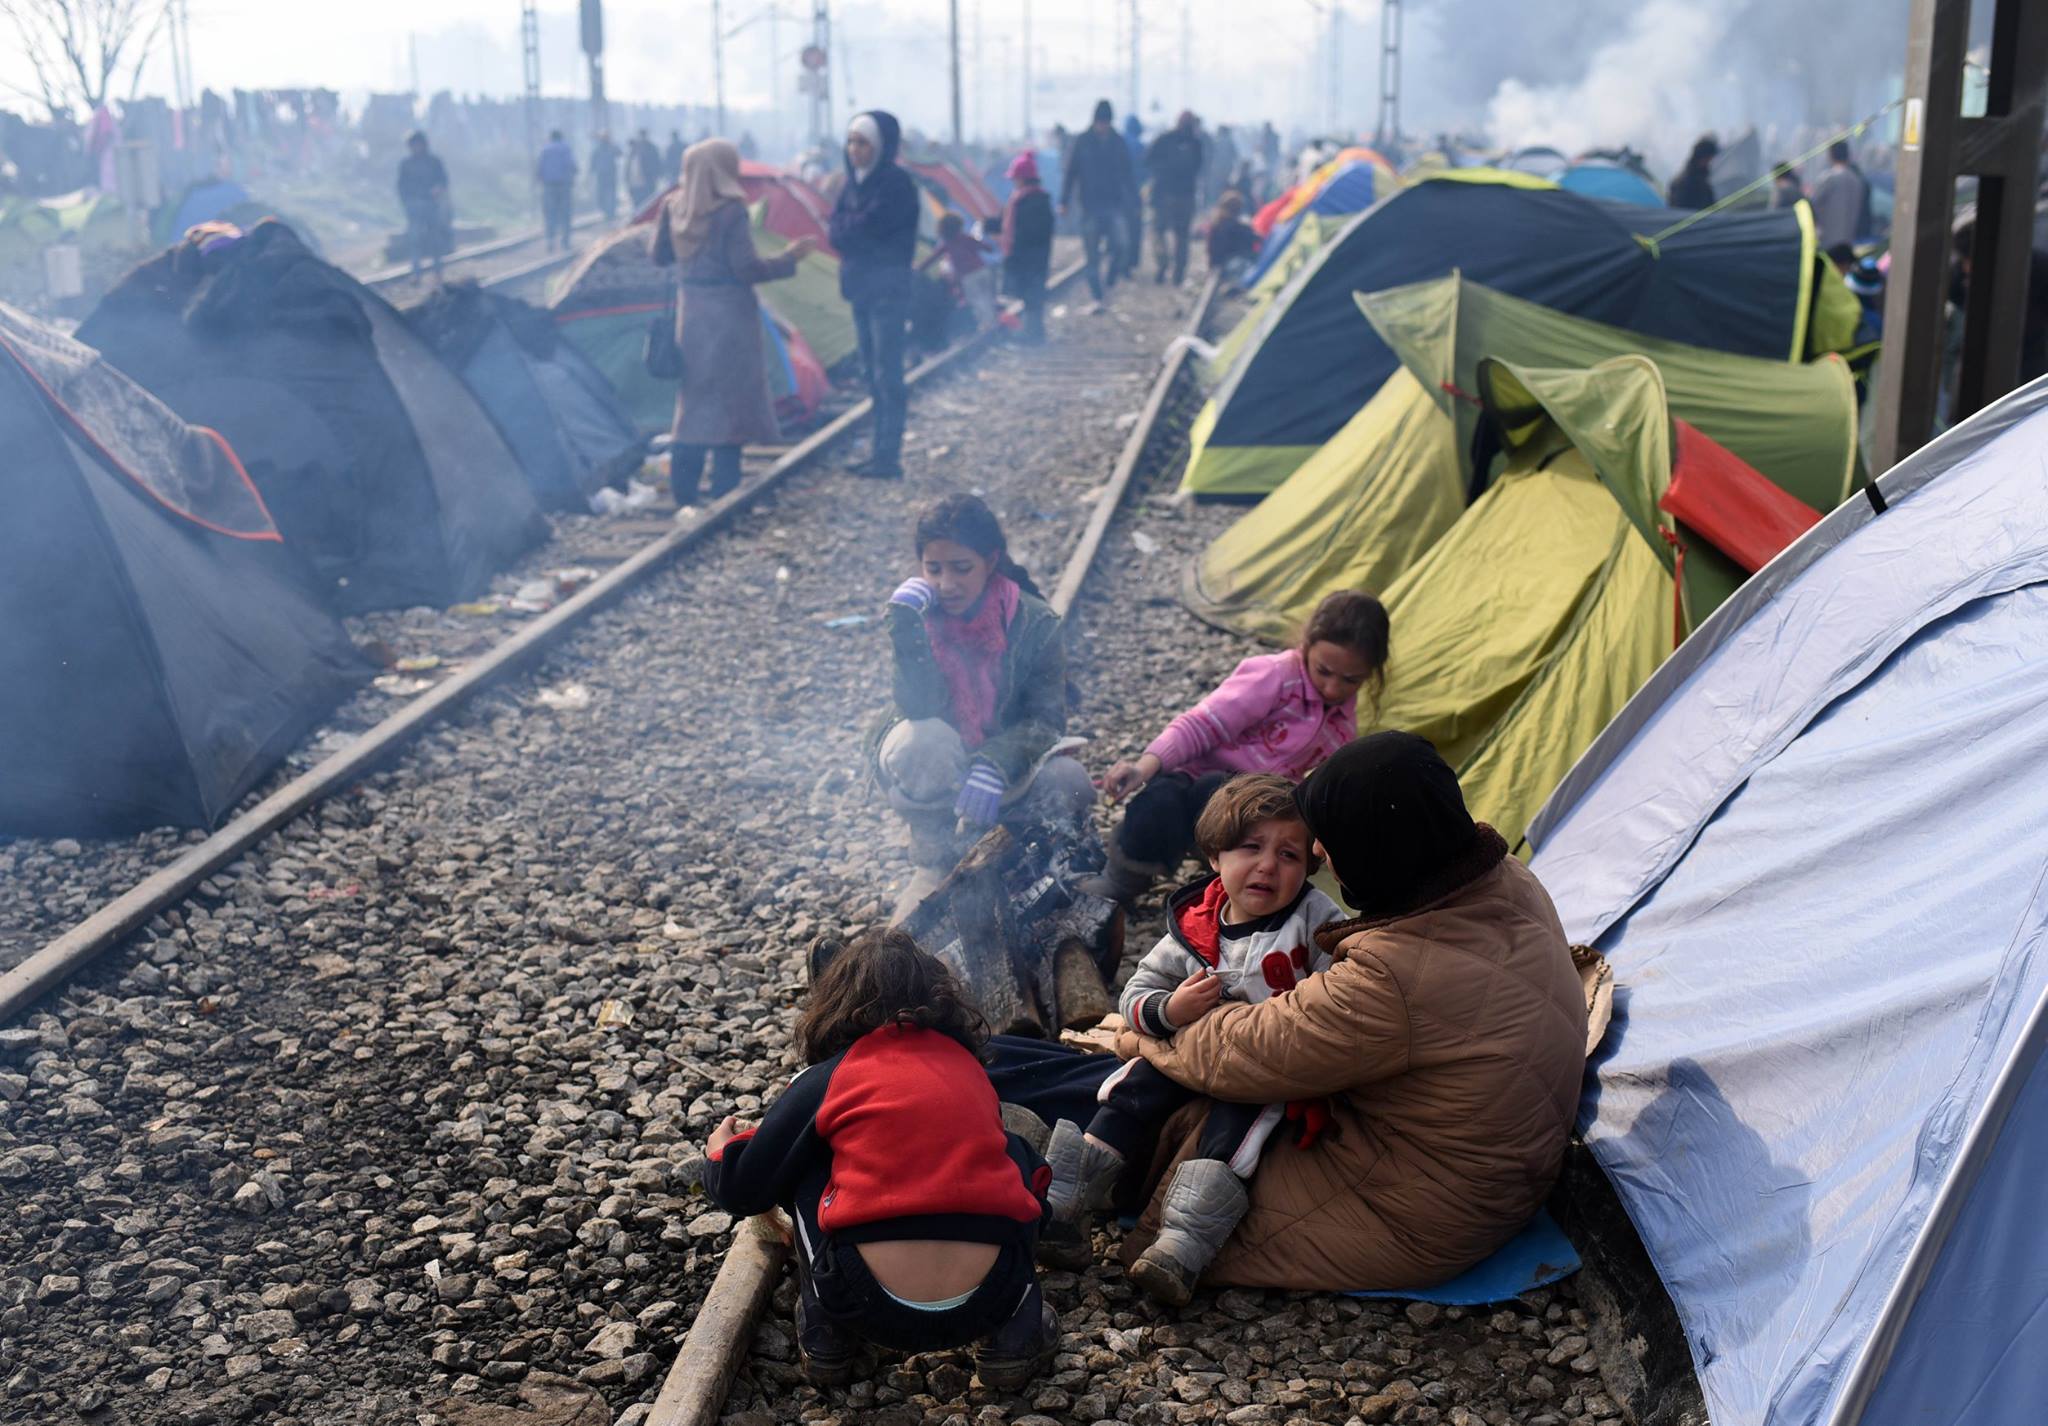 Refugees from Mideast wars camped along rail lines in Greece.